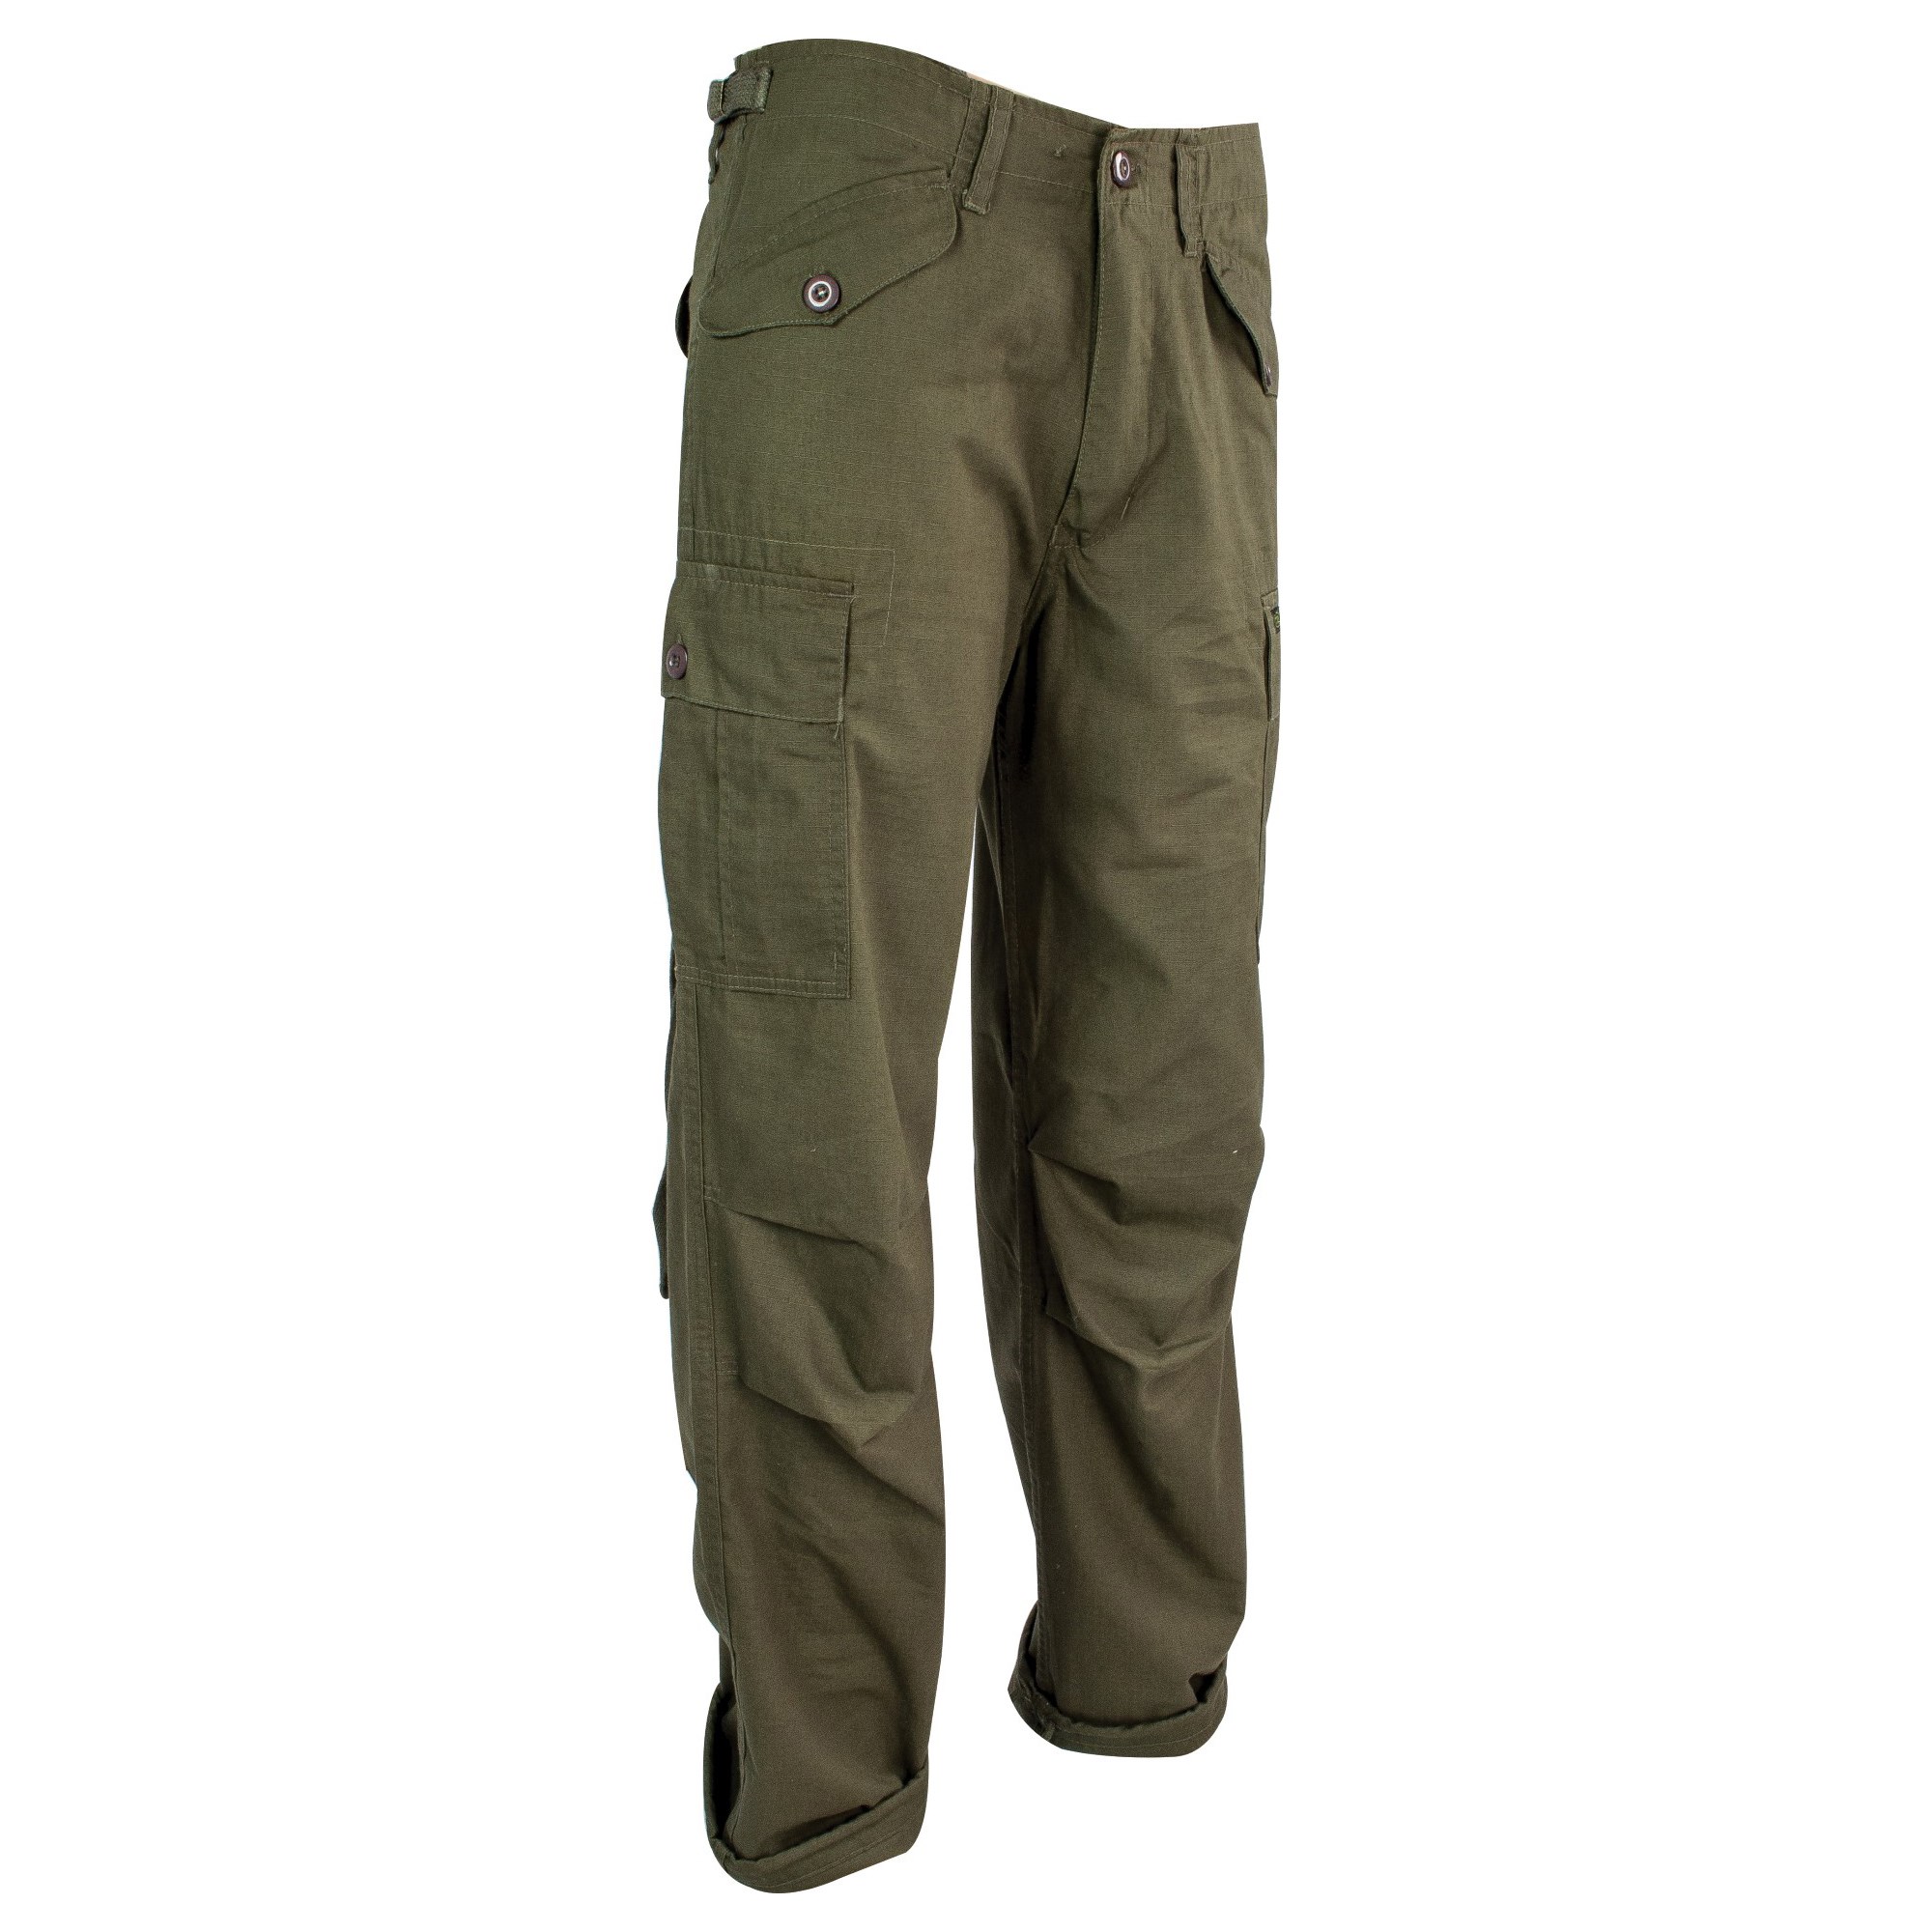 HIGHLANDER M65 Trousers rip-stop OLIVE | Army surplus MILITARY RANGE